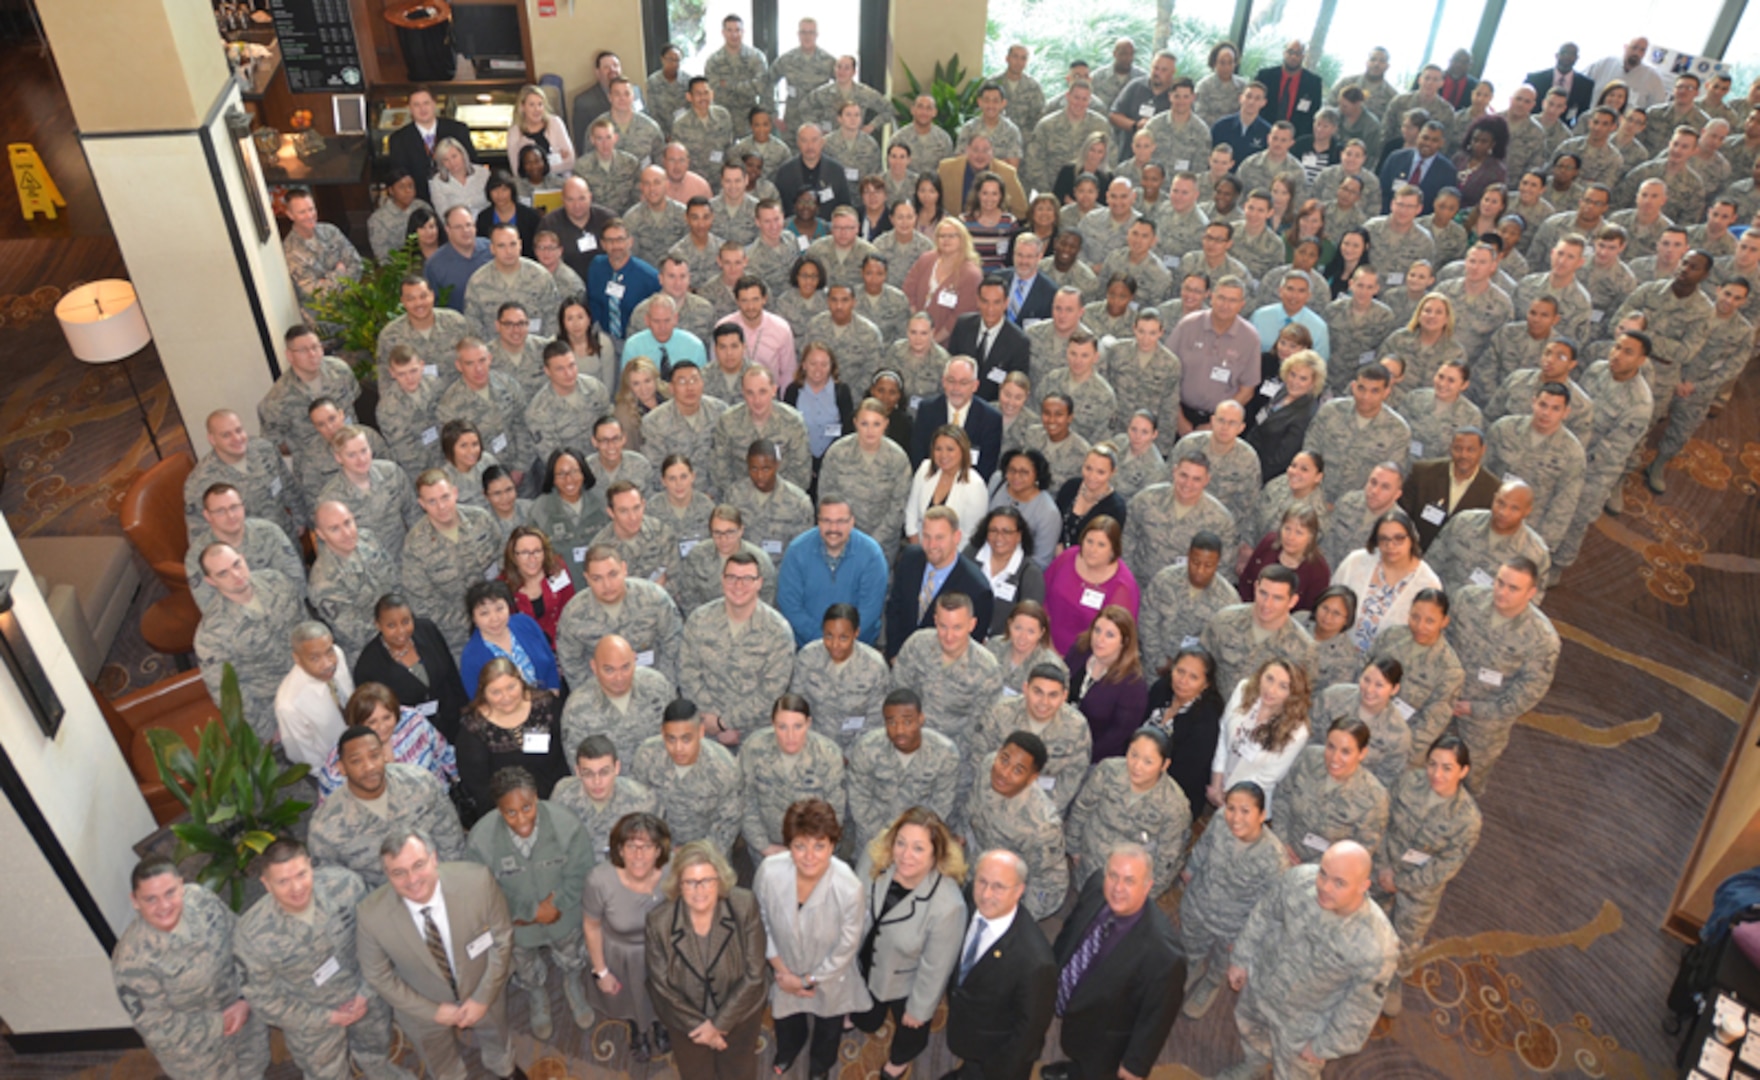 More than 300 Air Force financial customer service technicians received training and updates on issues, policies, and processes during a workshop in San Antonio, Jan. 29-Feb. 2.